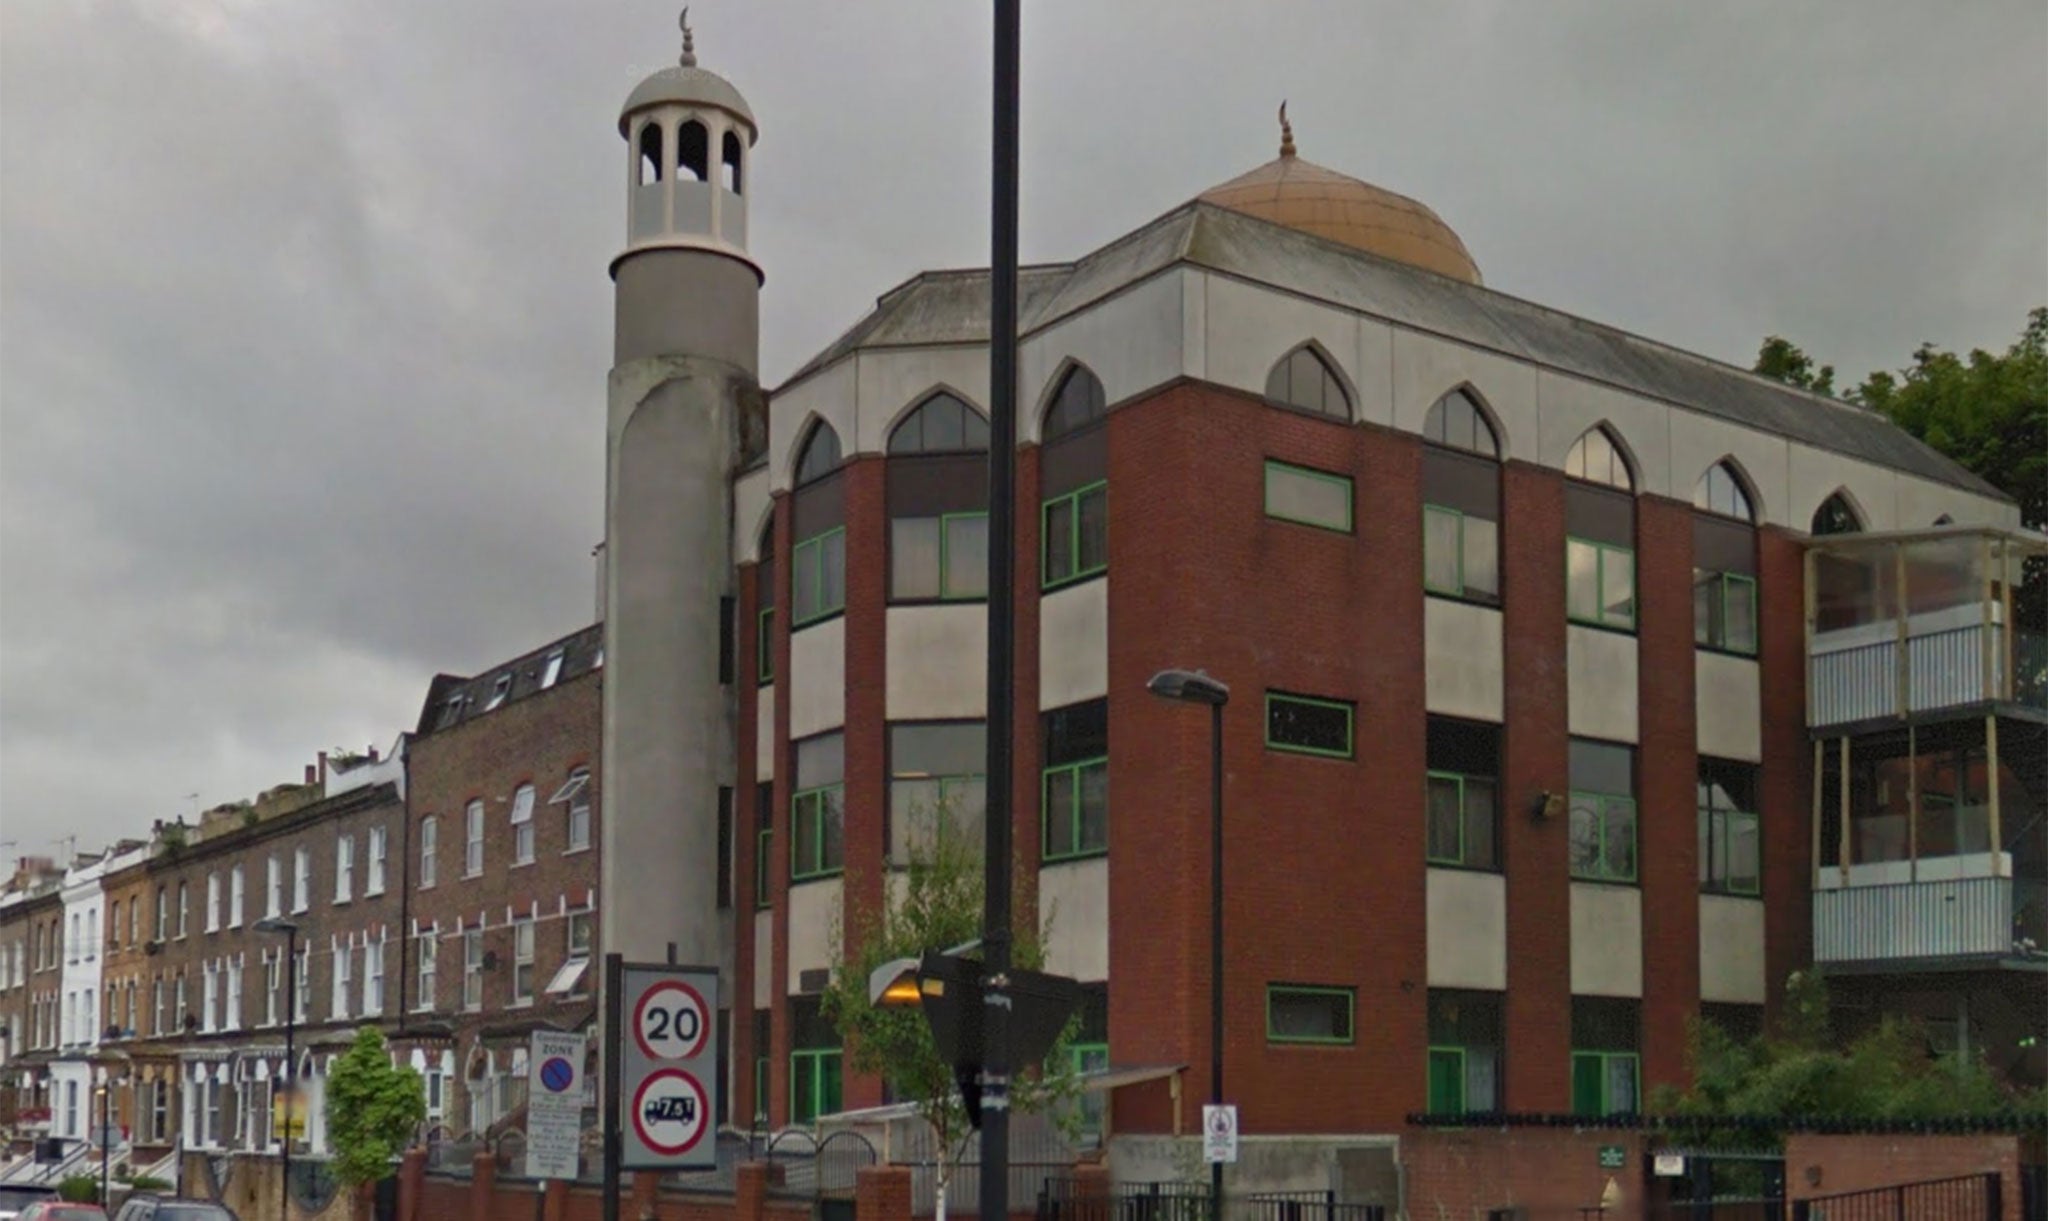 The Finsbury Park mosque, in north London, has had its HSBC account closed